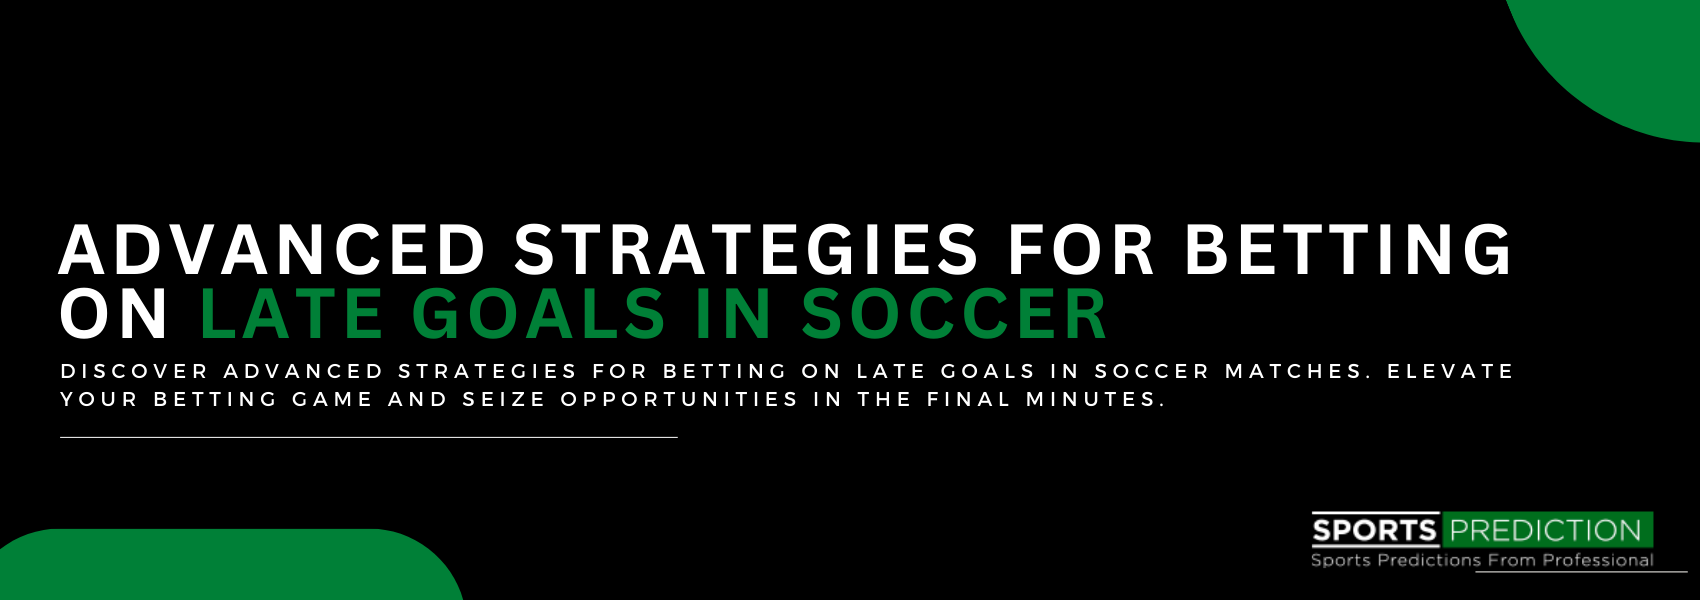 Advanced Strategies For Betting On Late Goals In Soccer